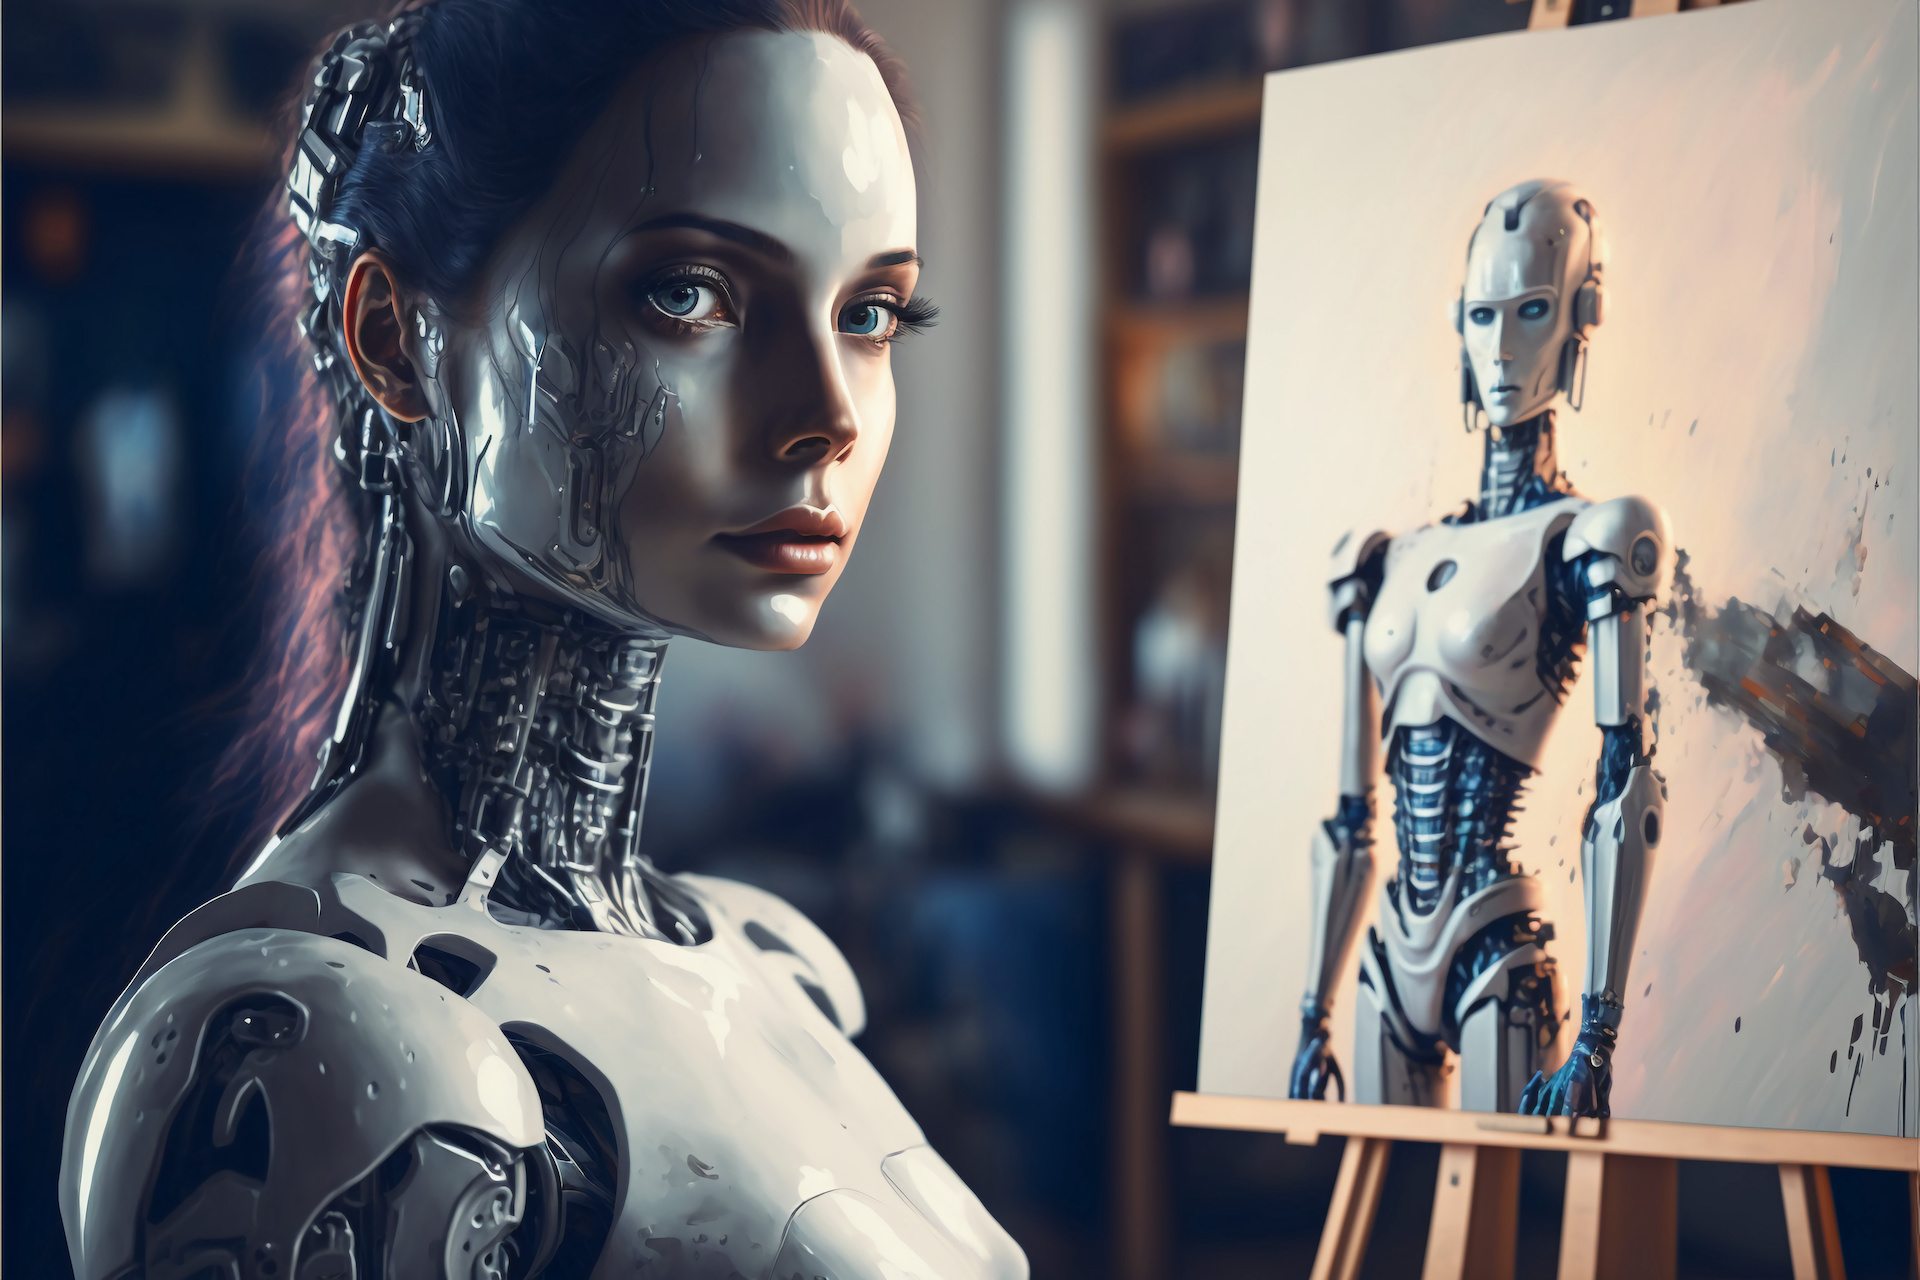 Artificial Inteligence, humaniod robot creating images, futuristic concept.